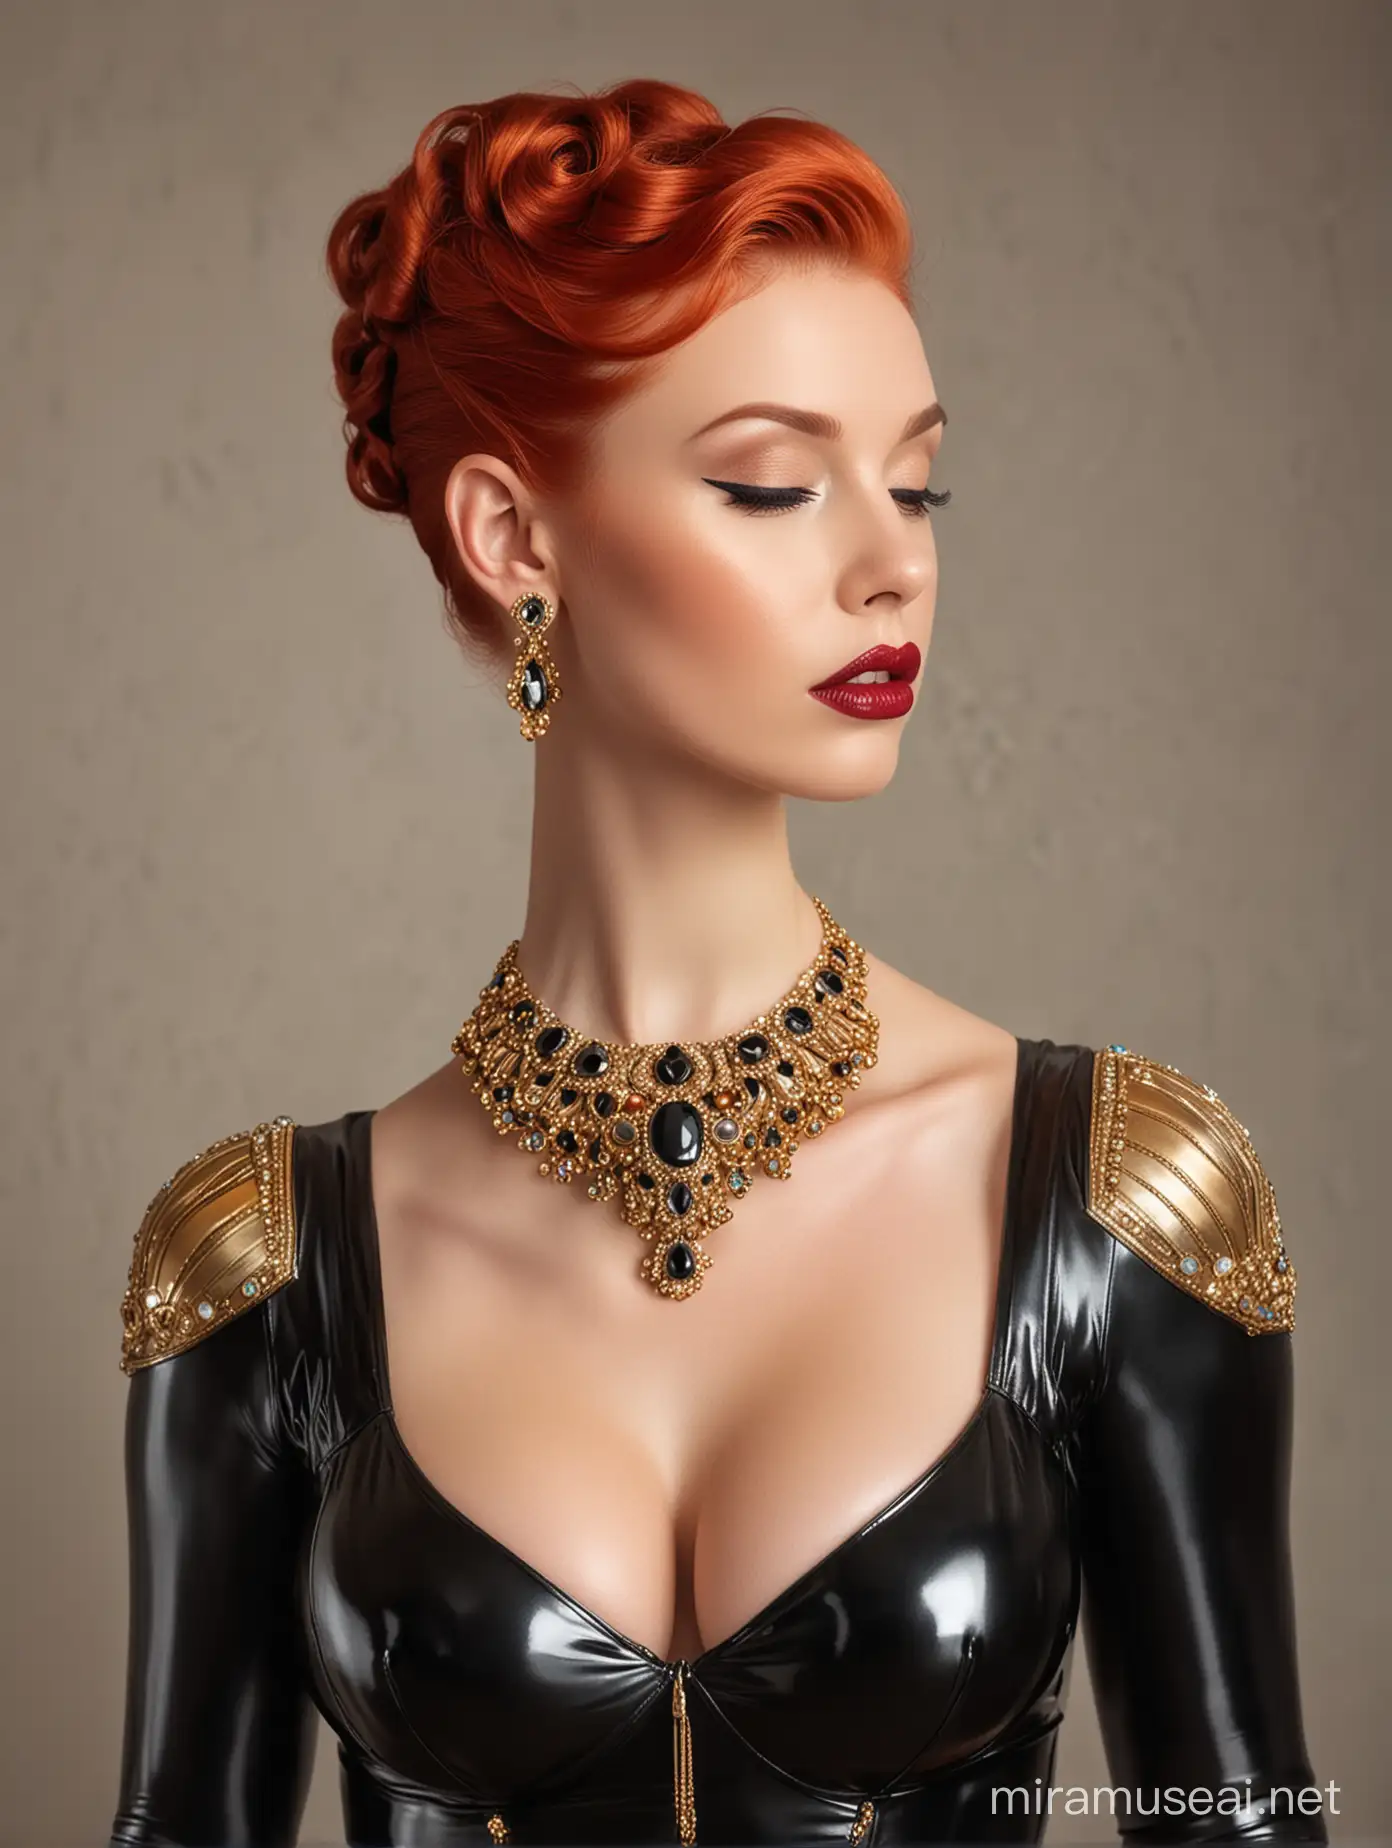 Elegant Candy Red Haired Lady in Art Deco Updo and Latex Catsuit with Golden Gemstone Jewelry